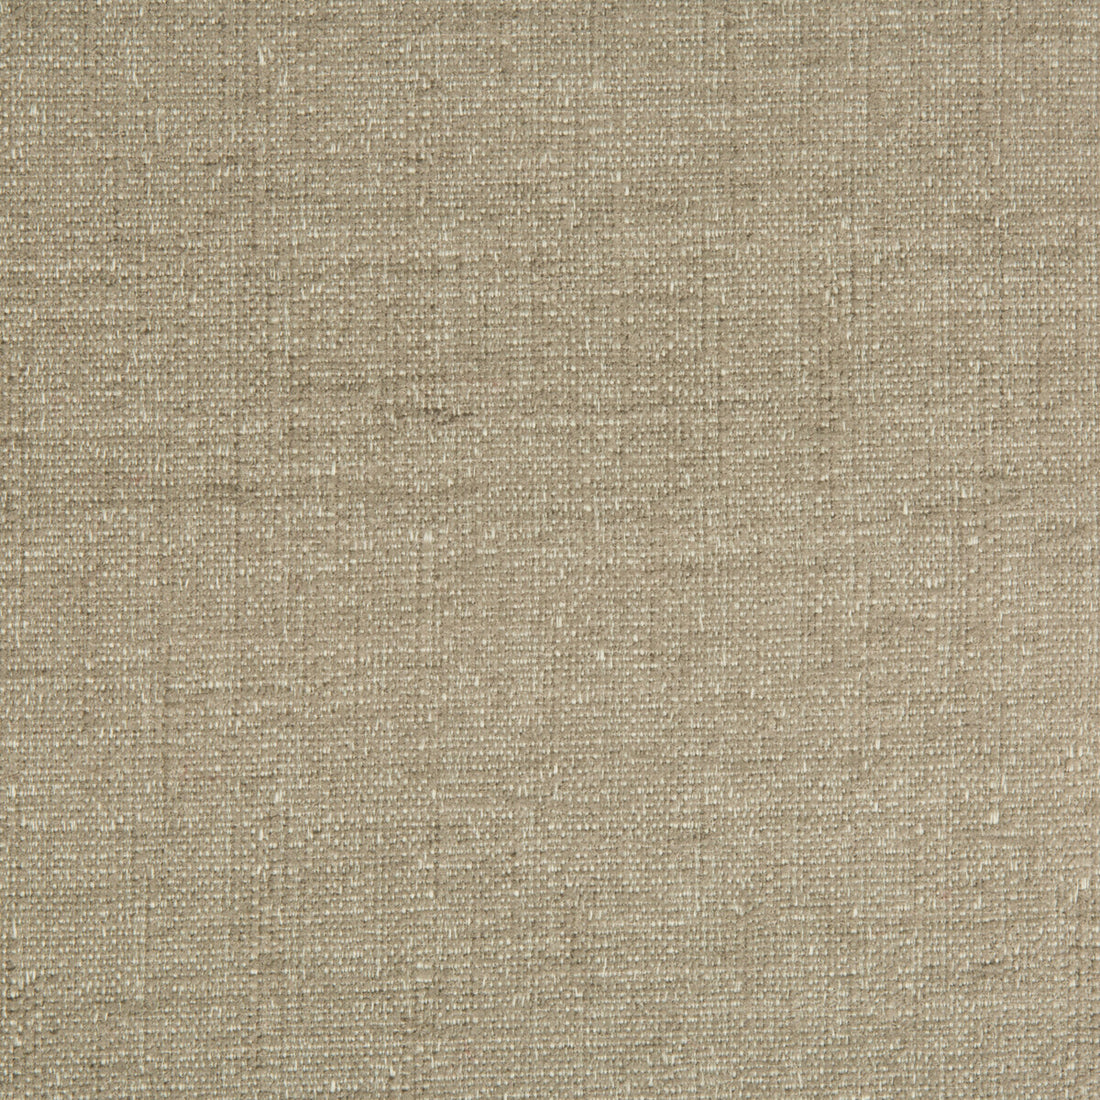 Kravet Smart fabric in 34622-11 color - pattern 34622.11.0 - by Kravet Smart in the Performance Crypton Home collection